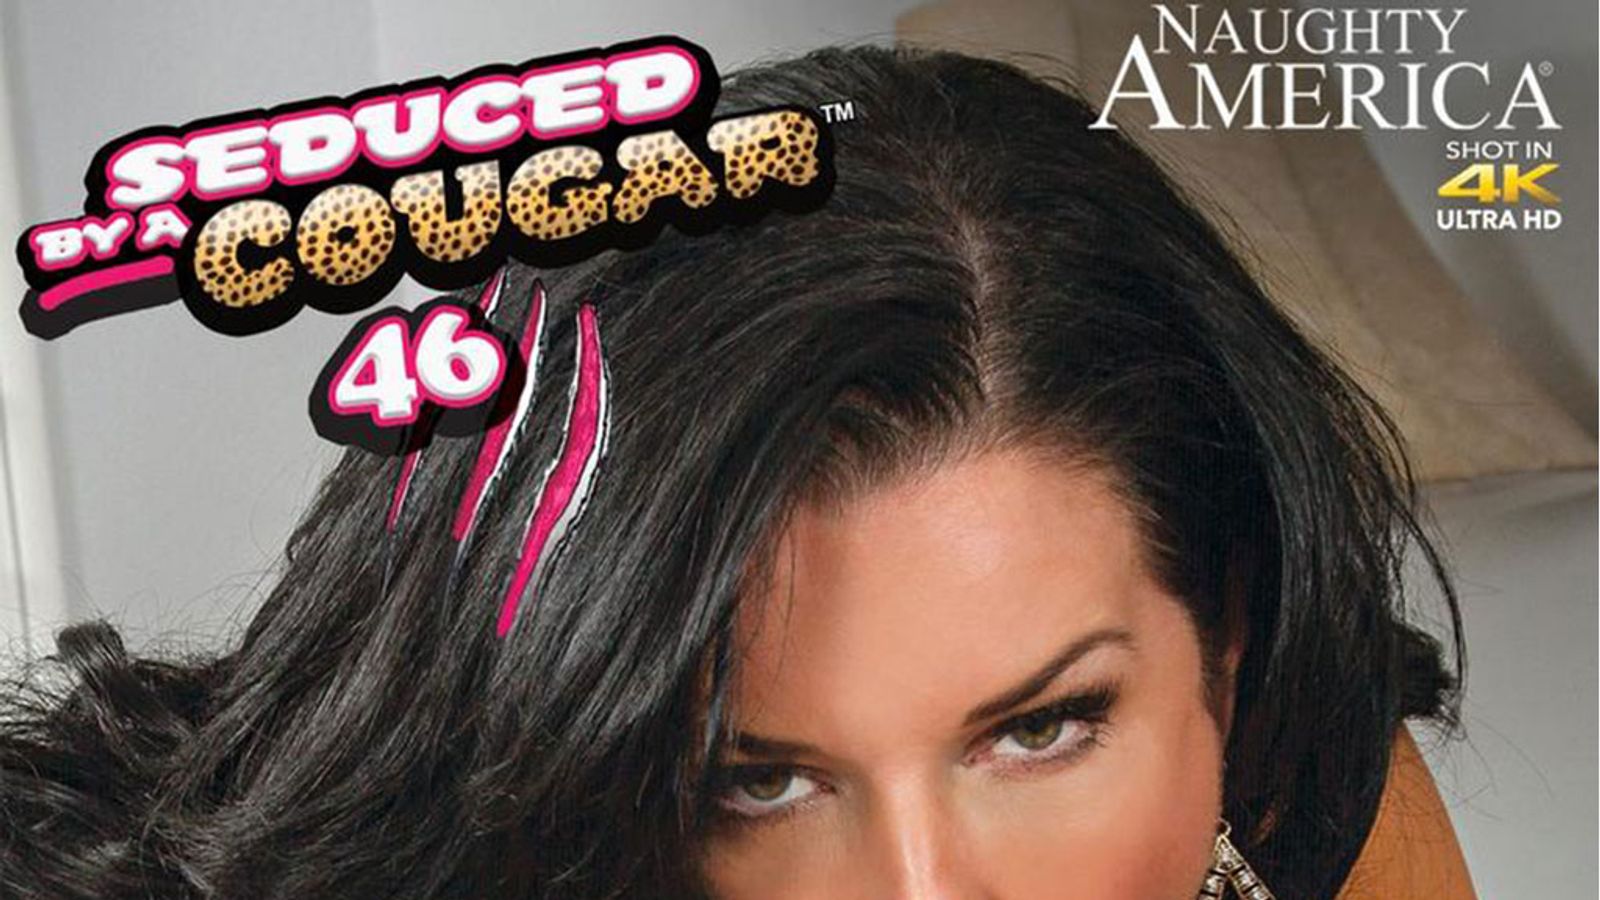 Who Wouldn't Want To Be 'Seduced by a Cougar' If She's Veronica Avluv?